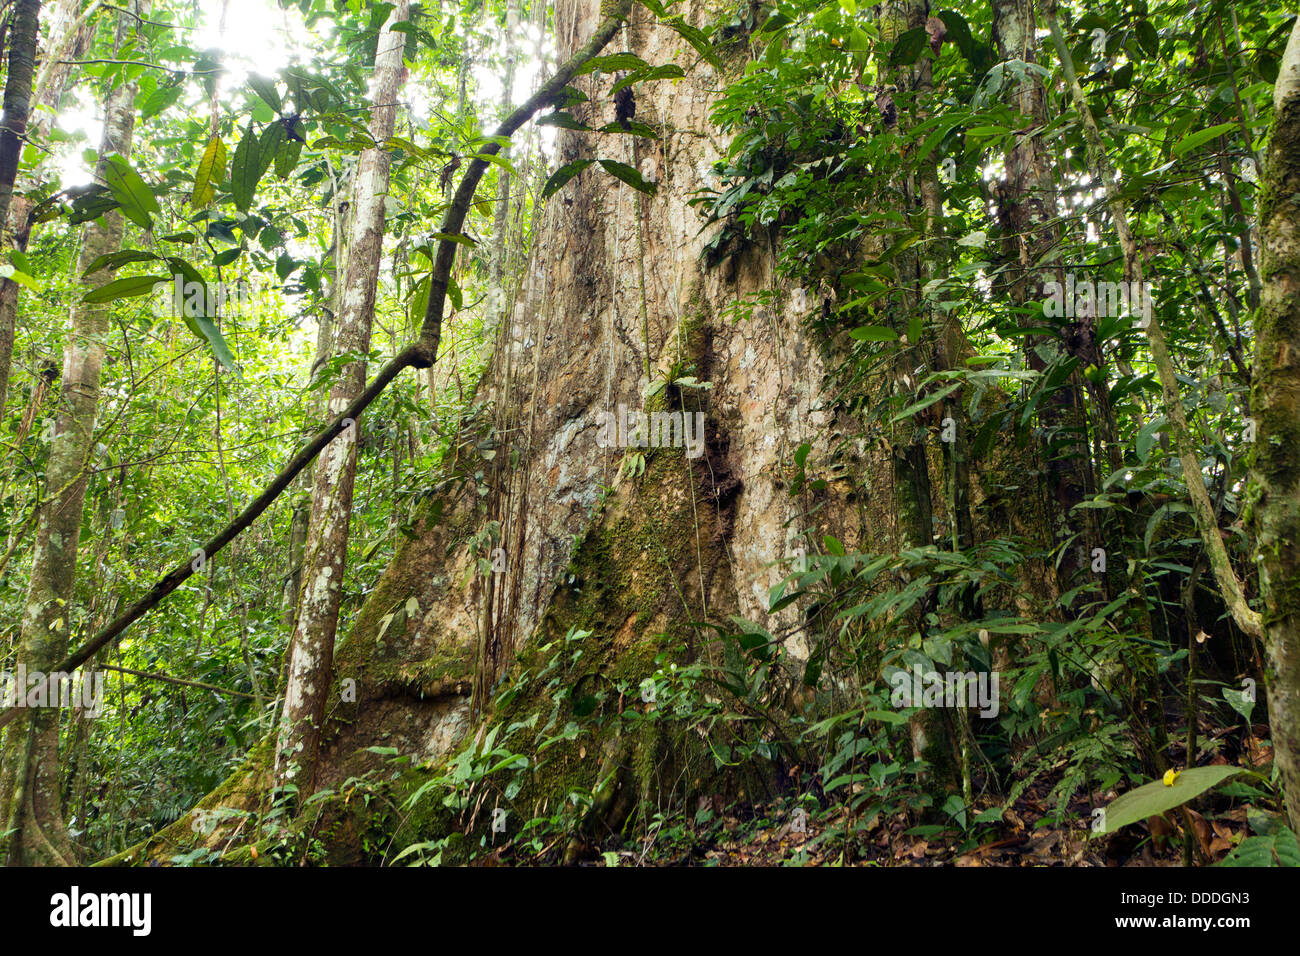 large tree with buttress roots in primary tropical rainforest, Ecuador Stock Photo